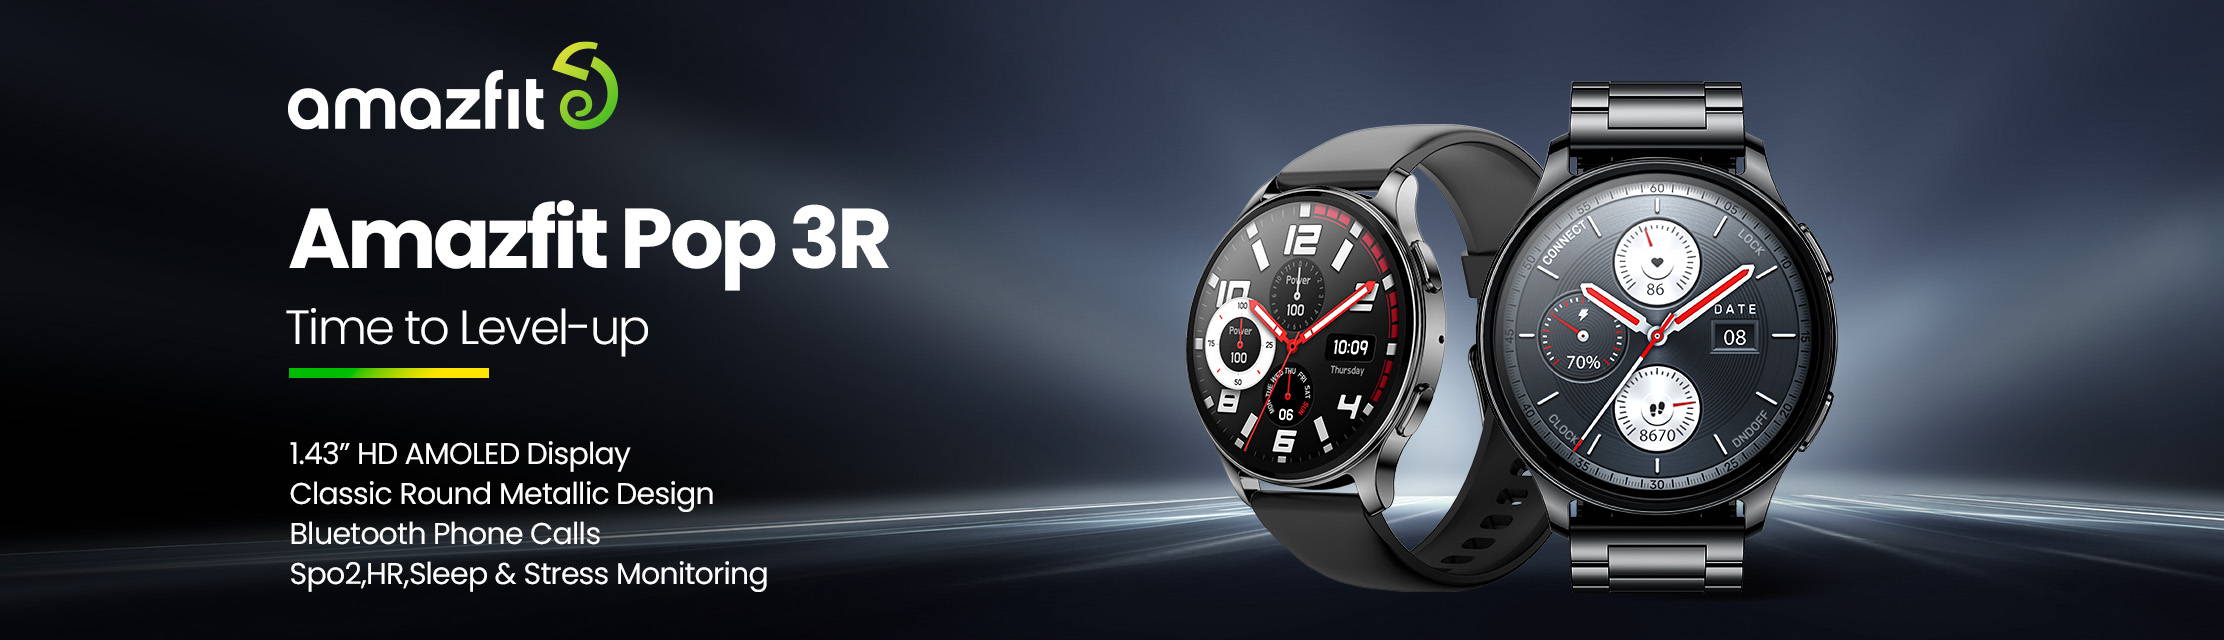 Amazfit Pop 3R 1.43" HD AMOLED Display With Bluetooth Calling Smart Watch